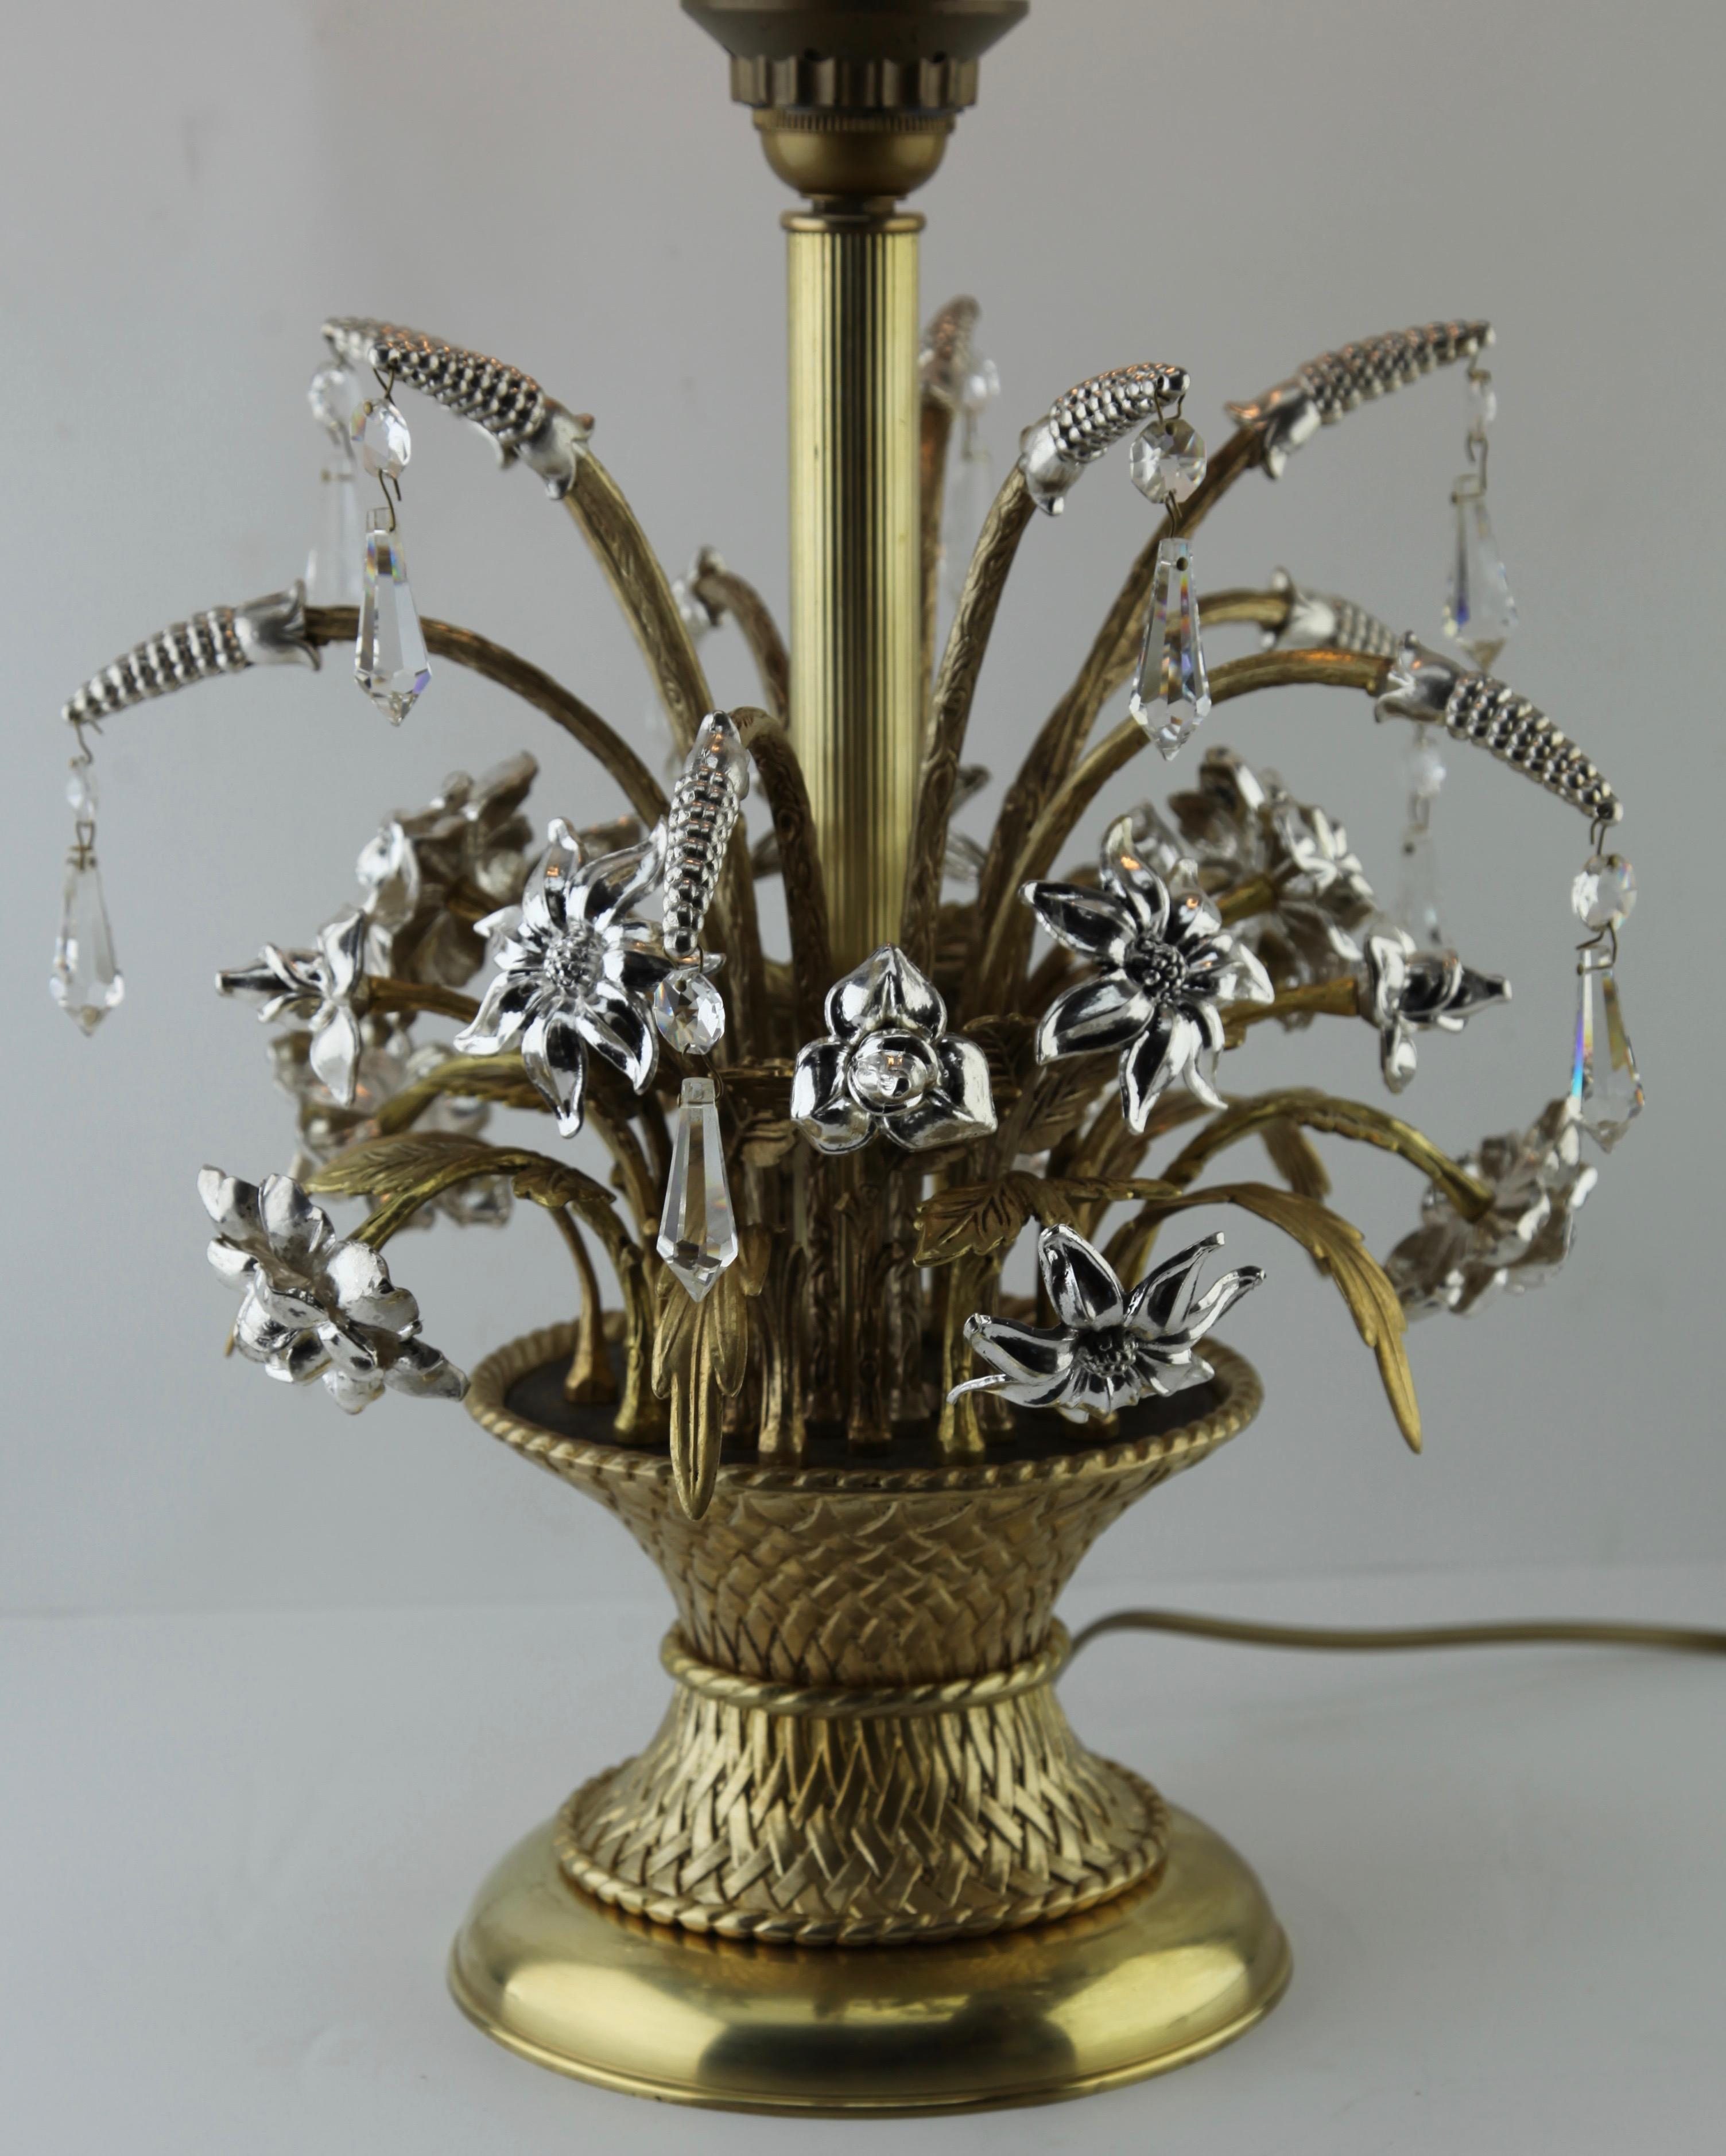 Silver Plate Lamp Representing a Bouquet of Brass and Silver Metal Flowers in a Basket, 1960s For Sale